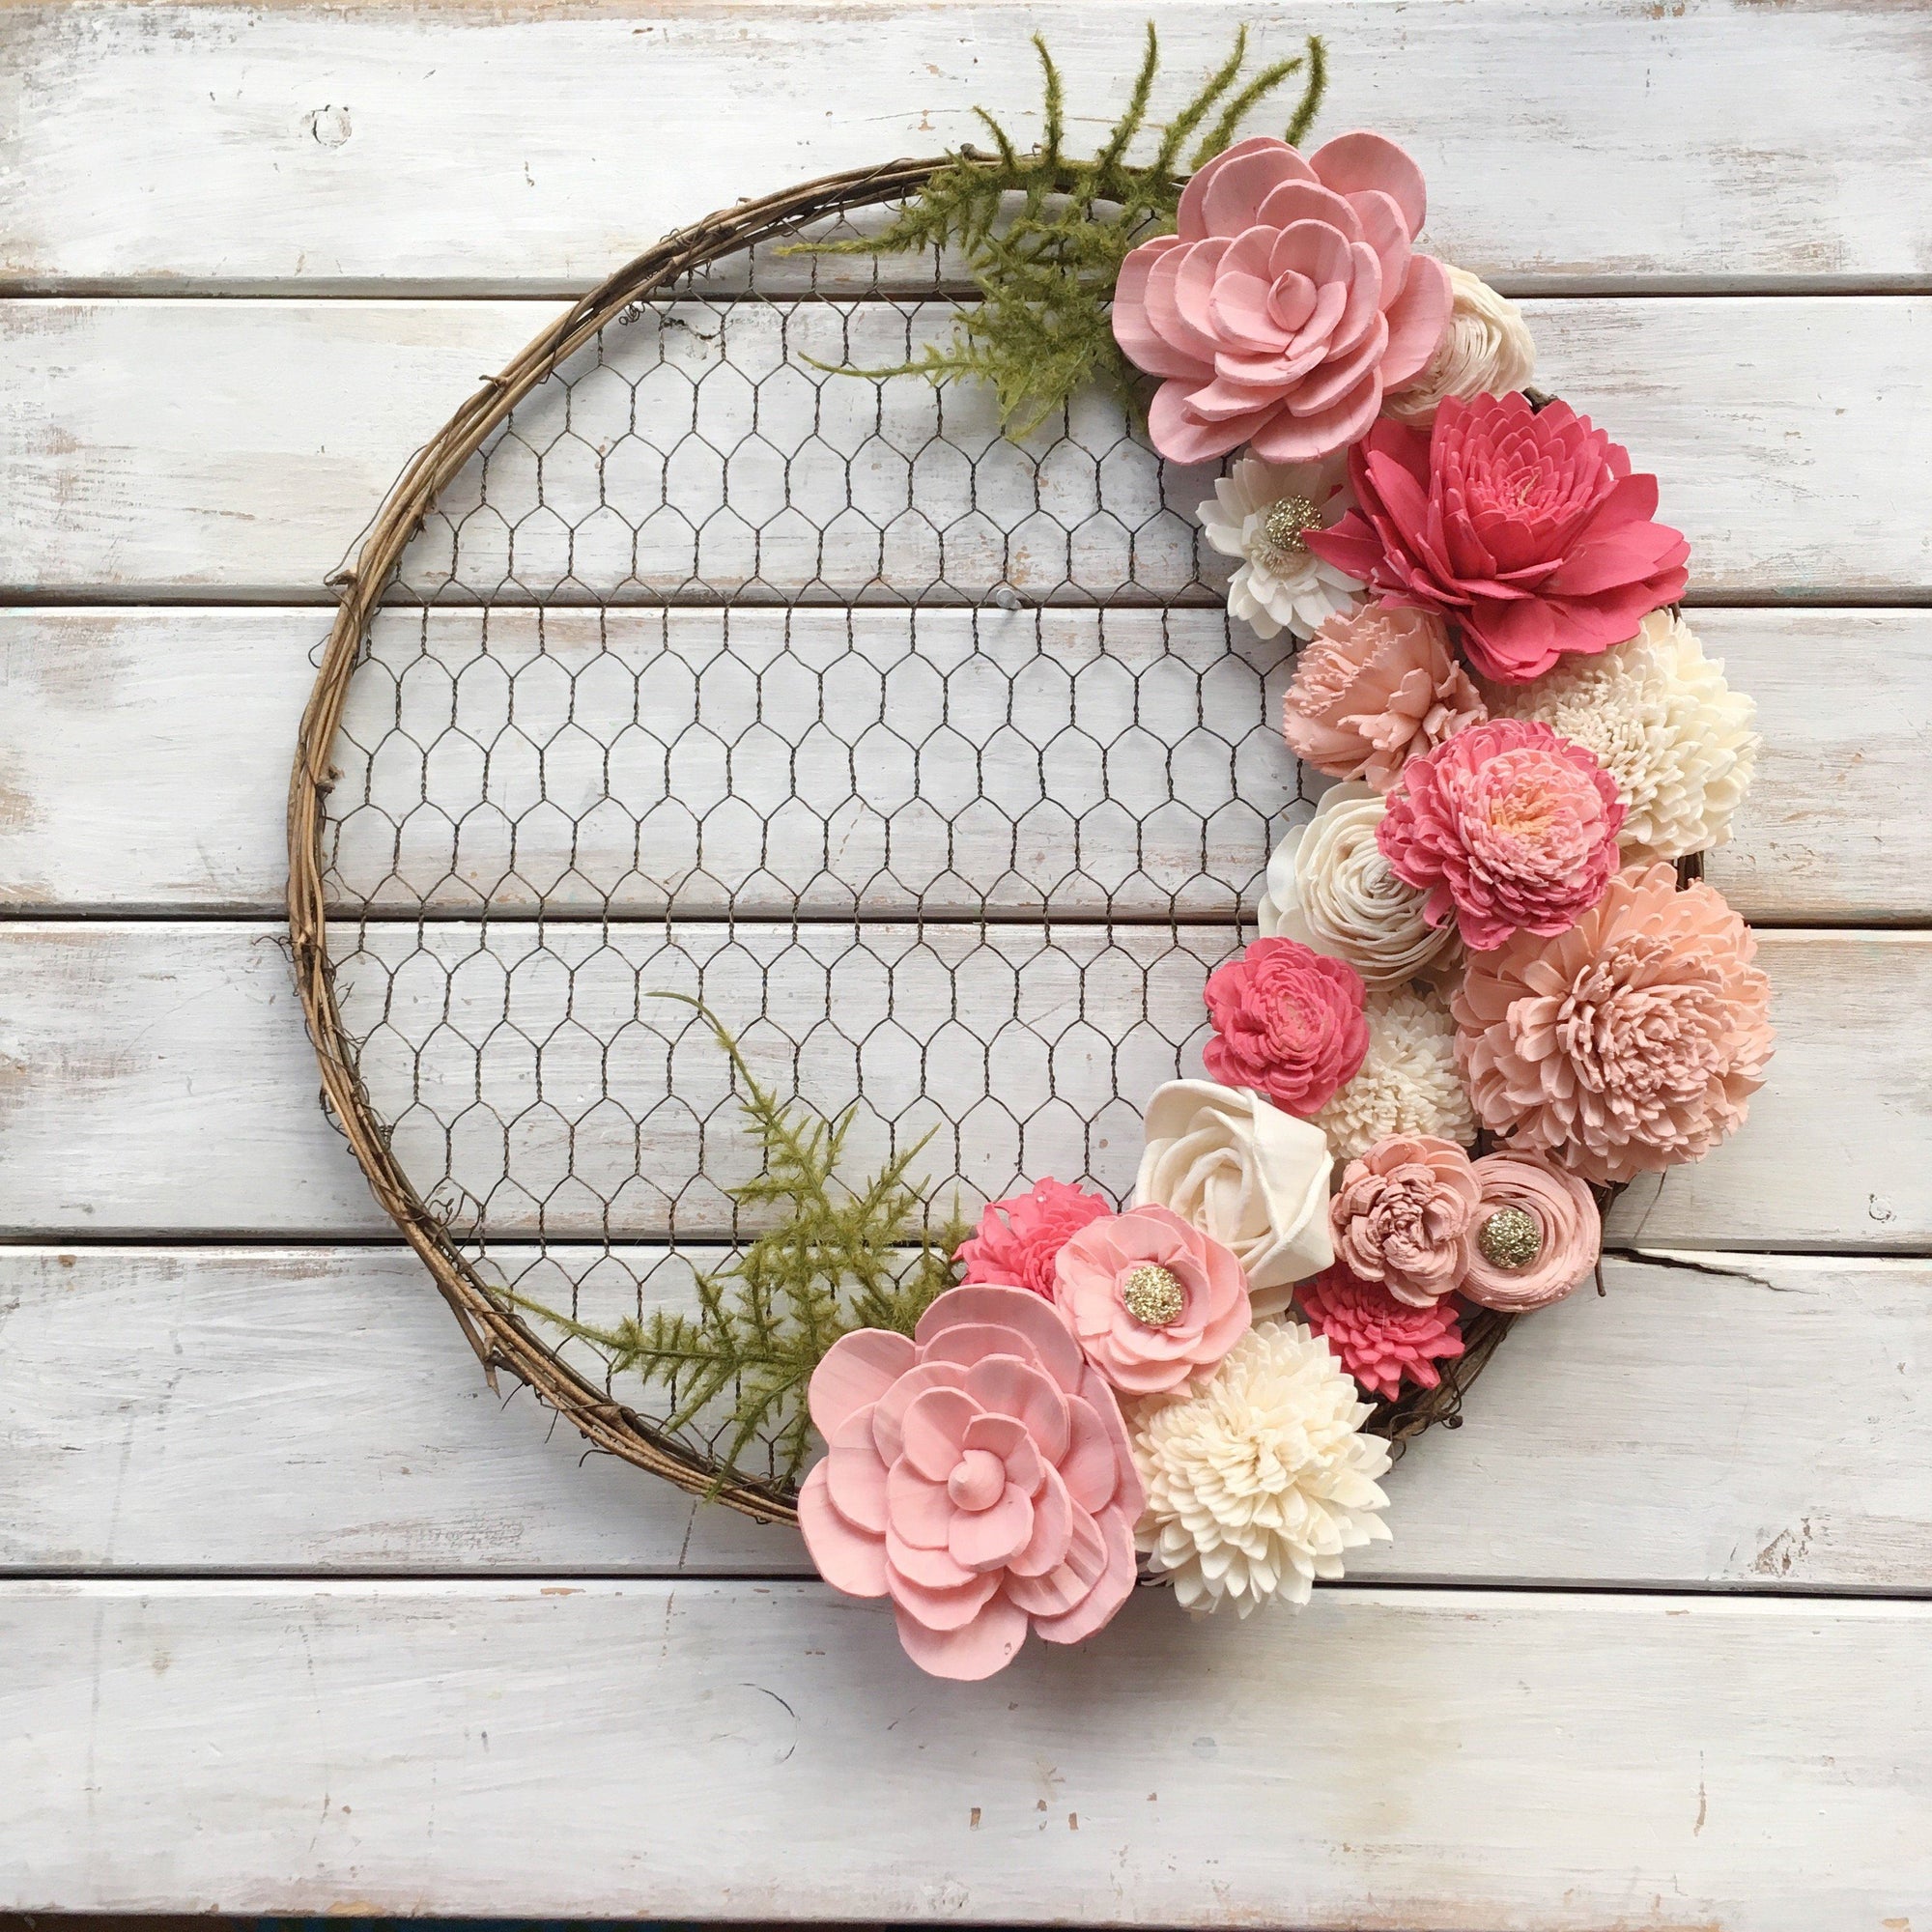 How to Make Chicken Wire Flowers in 5 Creative Steps - Craft